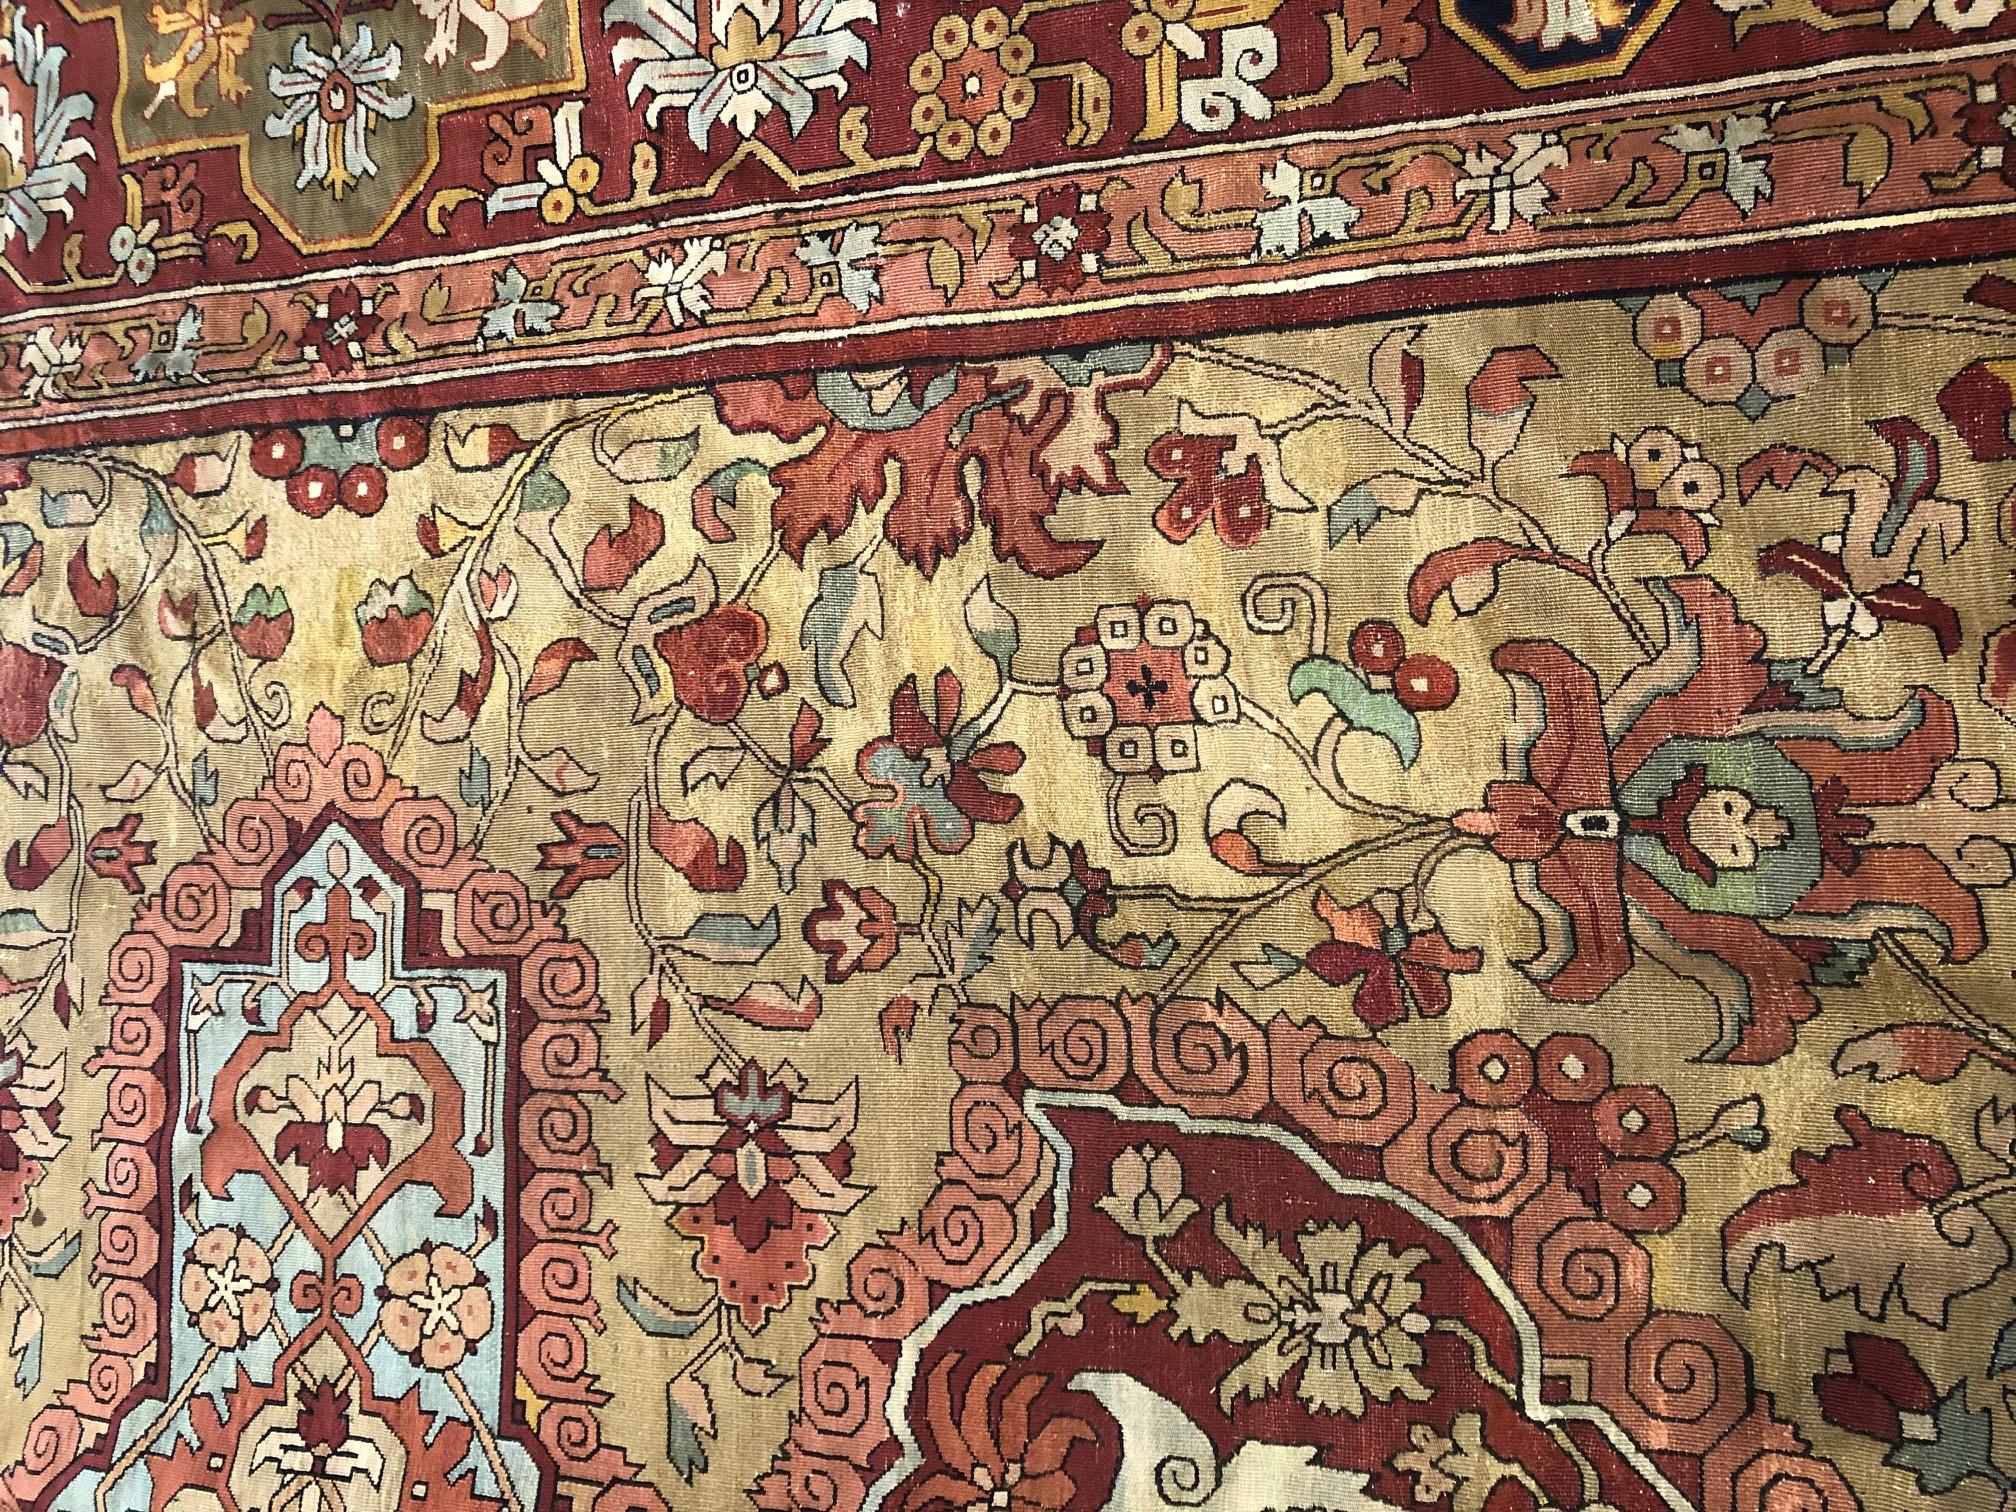 This exceptional flat-weave carpet of Indian manufacture, from the early 20th century, is very rare.
The design is inspired by the palace rugs of the Safavid tradition, with a refined combination of colors. The border is wide and decorated with